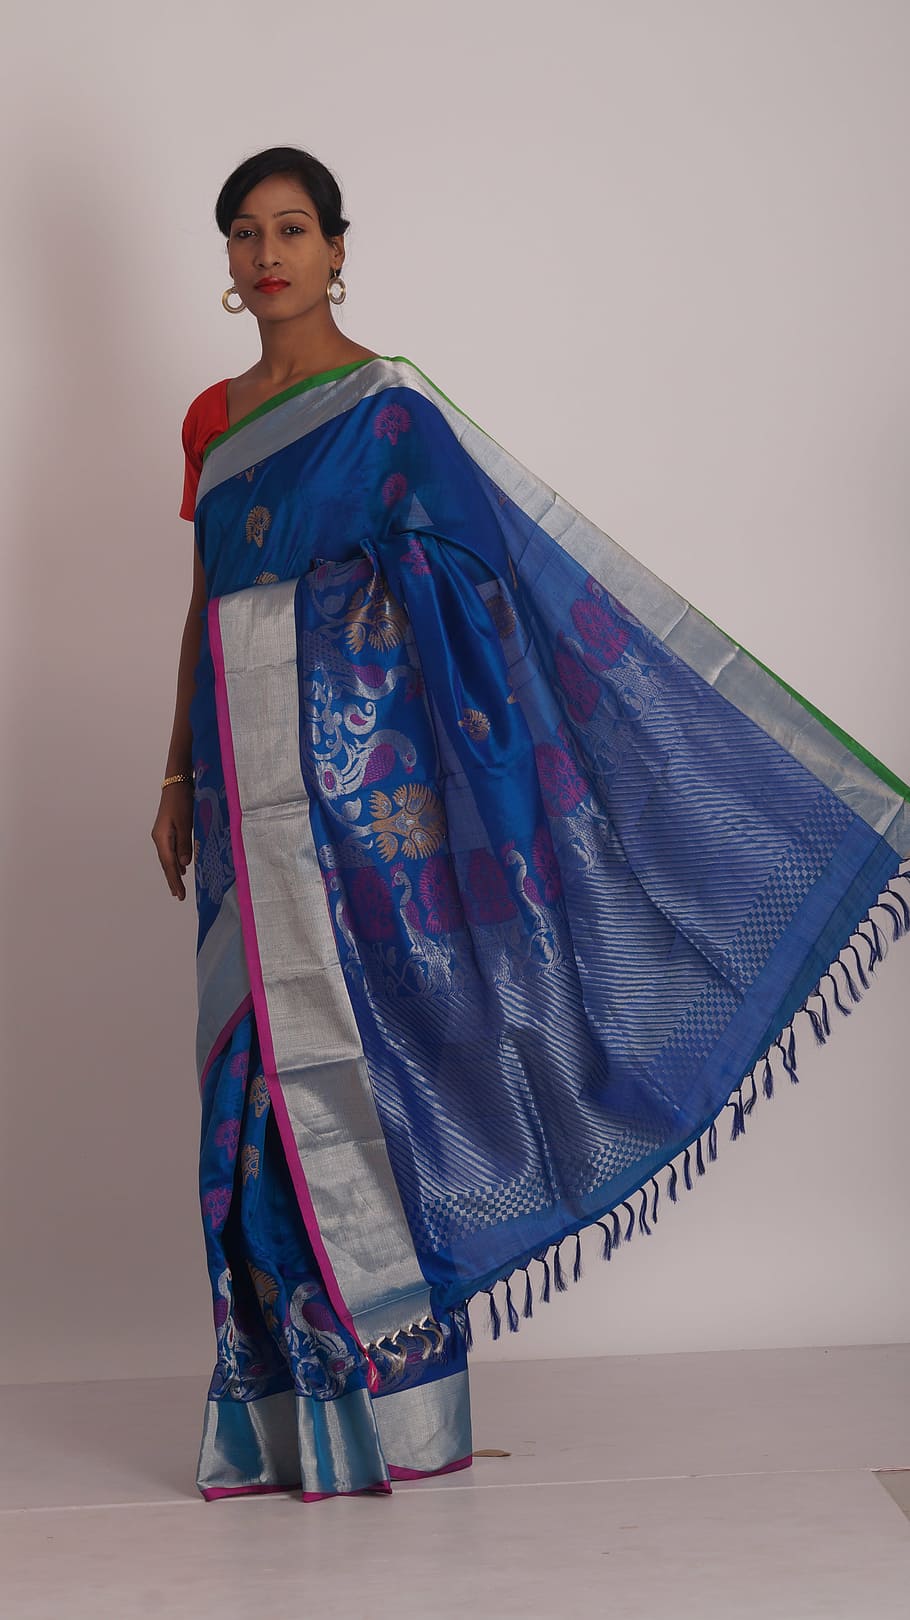 sarees, blue color saris, womens wear, indian clothing, traditional, one person, traditional clothing, clothing, indoors, standing